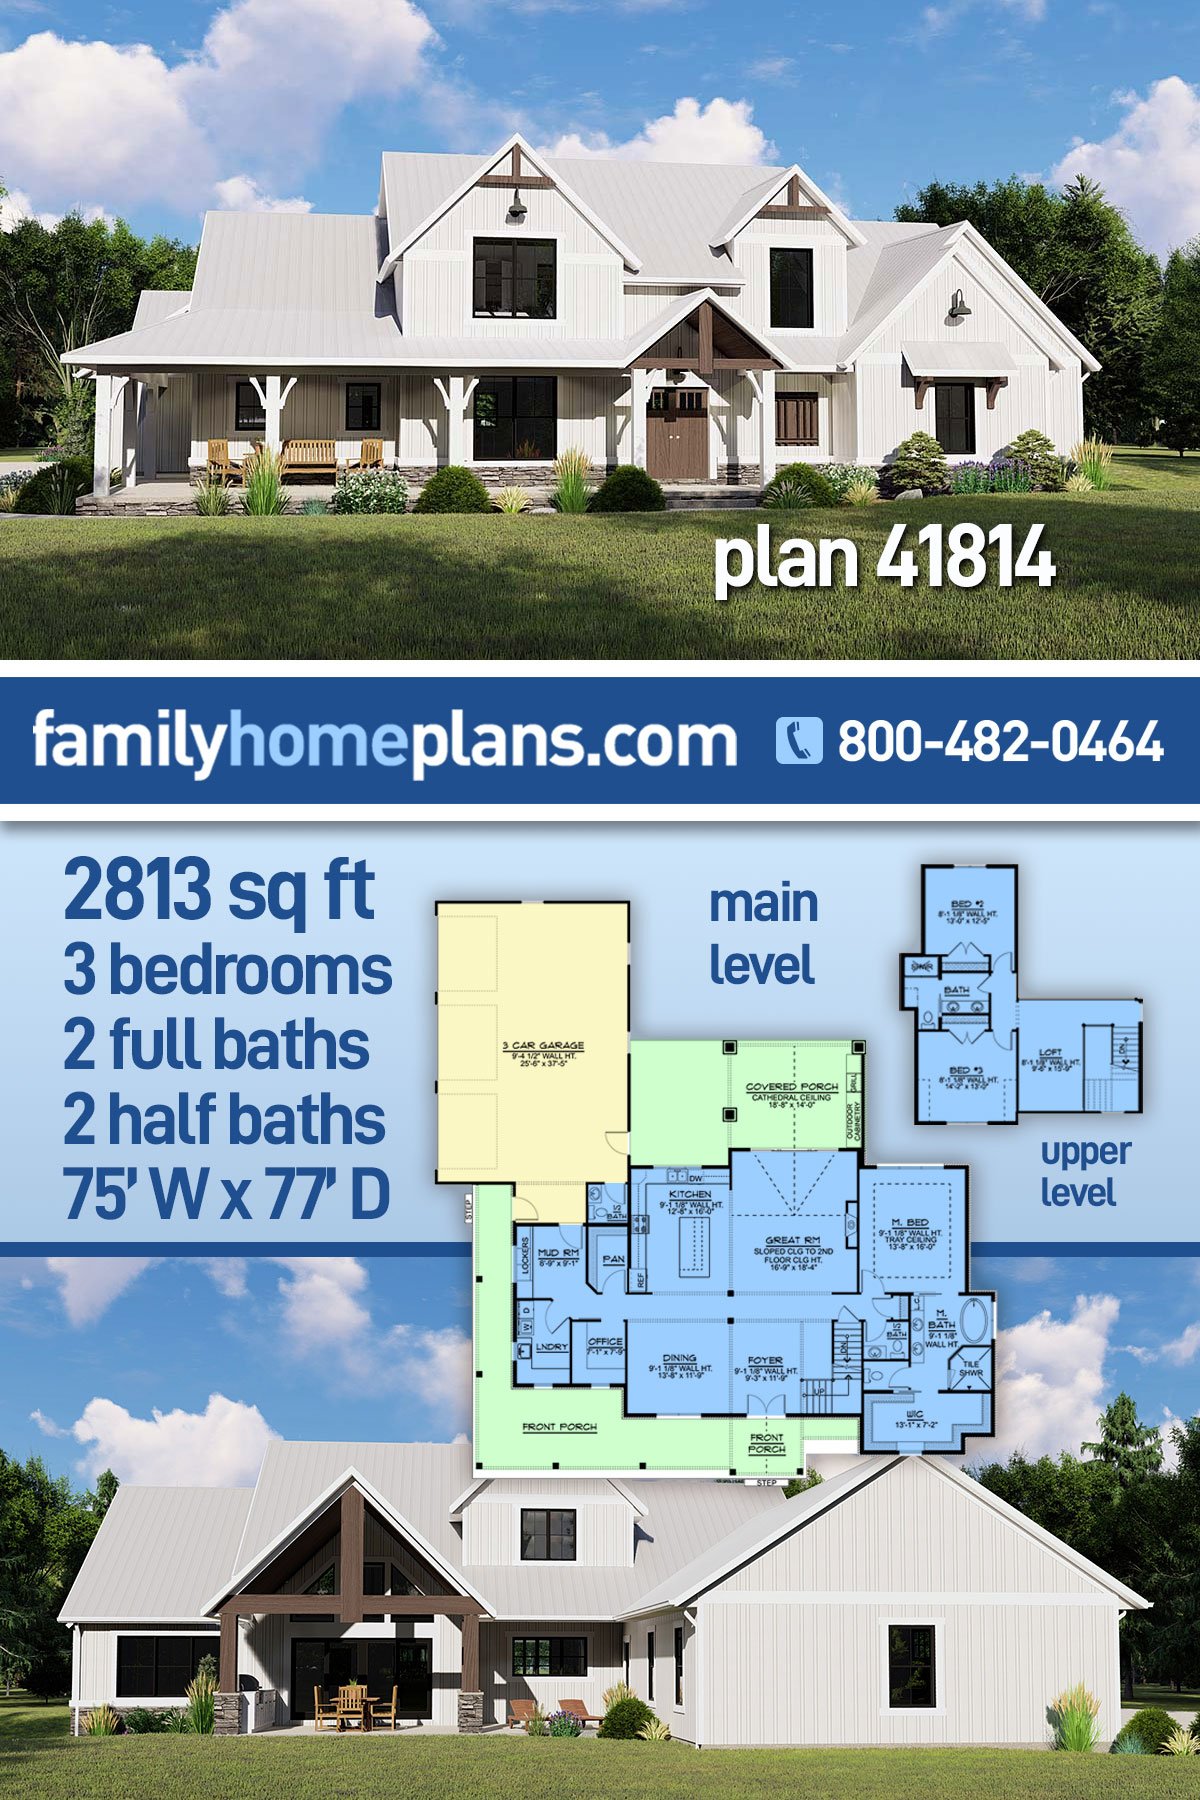 Country, Craftsman, Farmhouse, Traditional House Plan 41814 with 3 Beds, 4 Baths, 3 Car Garage